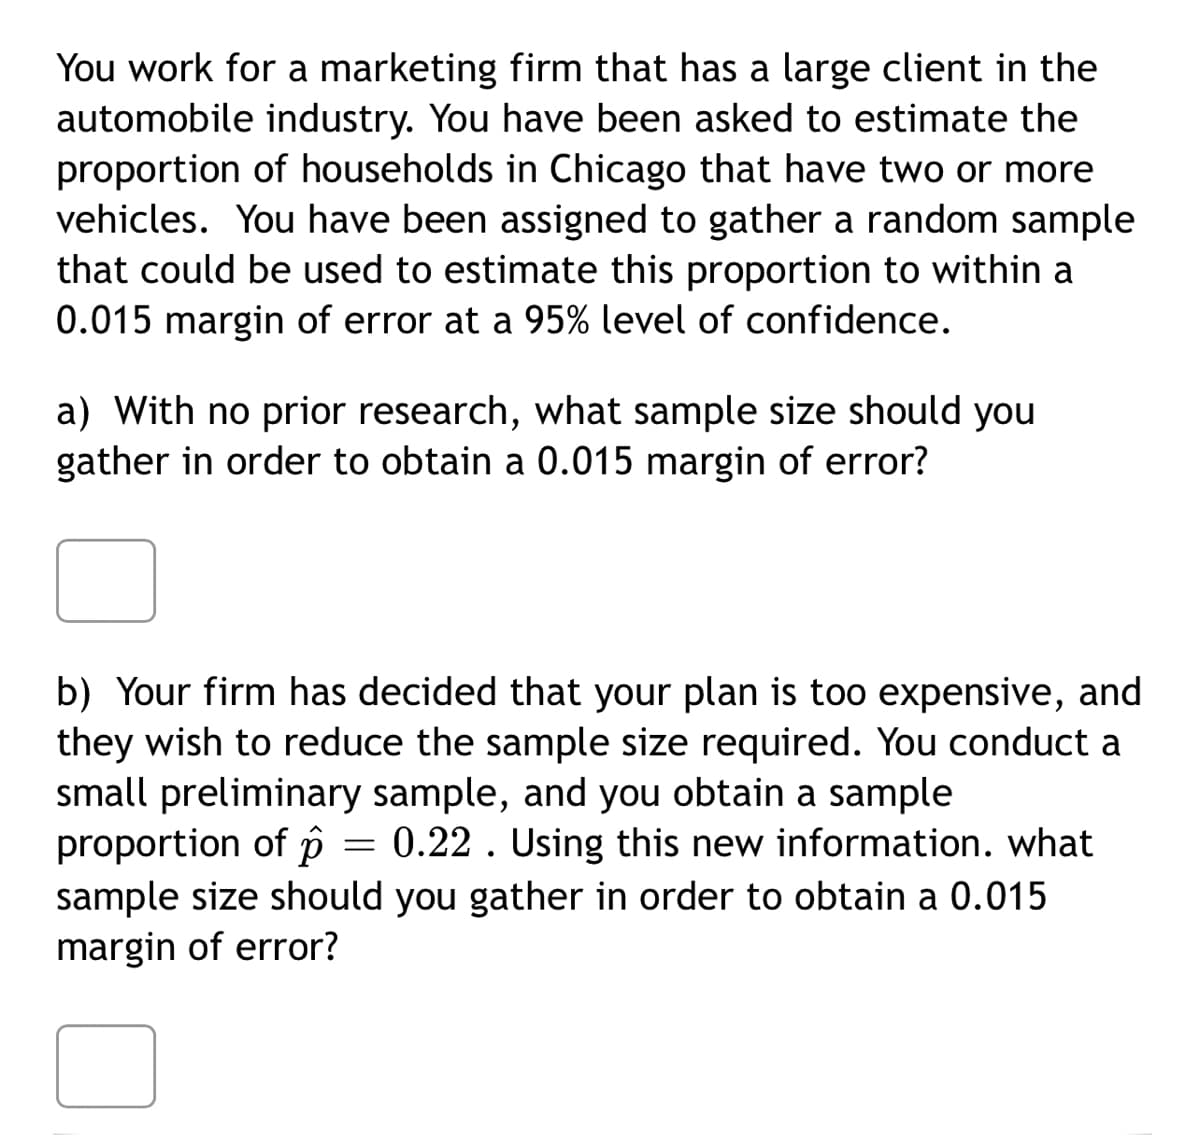 You work for a marketing firm that has a large client in the
automobile industry. You have been asked to estimate the
proportion of households in Chicago that have two or more
vehicles. You have been assigned to gather a random sample
that could be used to estimate this proportion to within a
0.015 margin of error at a 95% level of confidence.
a) With no prior research, what sample size should you
gather in order to obtain a 0.015 margin of error?
b) Your firm has decided that your plan is too expensive, and
they wish to reduce the sample size required. You conduct a
small preliminary sample, and you obtain a sample
proportion of p = 0.22 . Using this new information. what
sample size should you gather in order to obtain a 0.015
margin of error?
